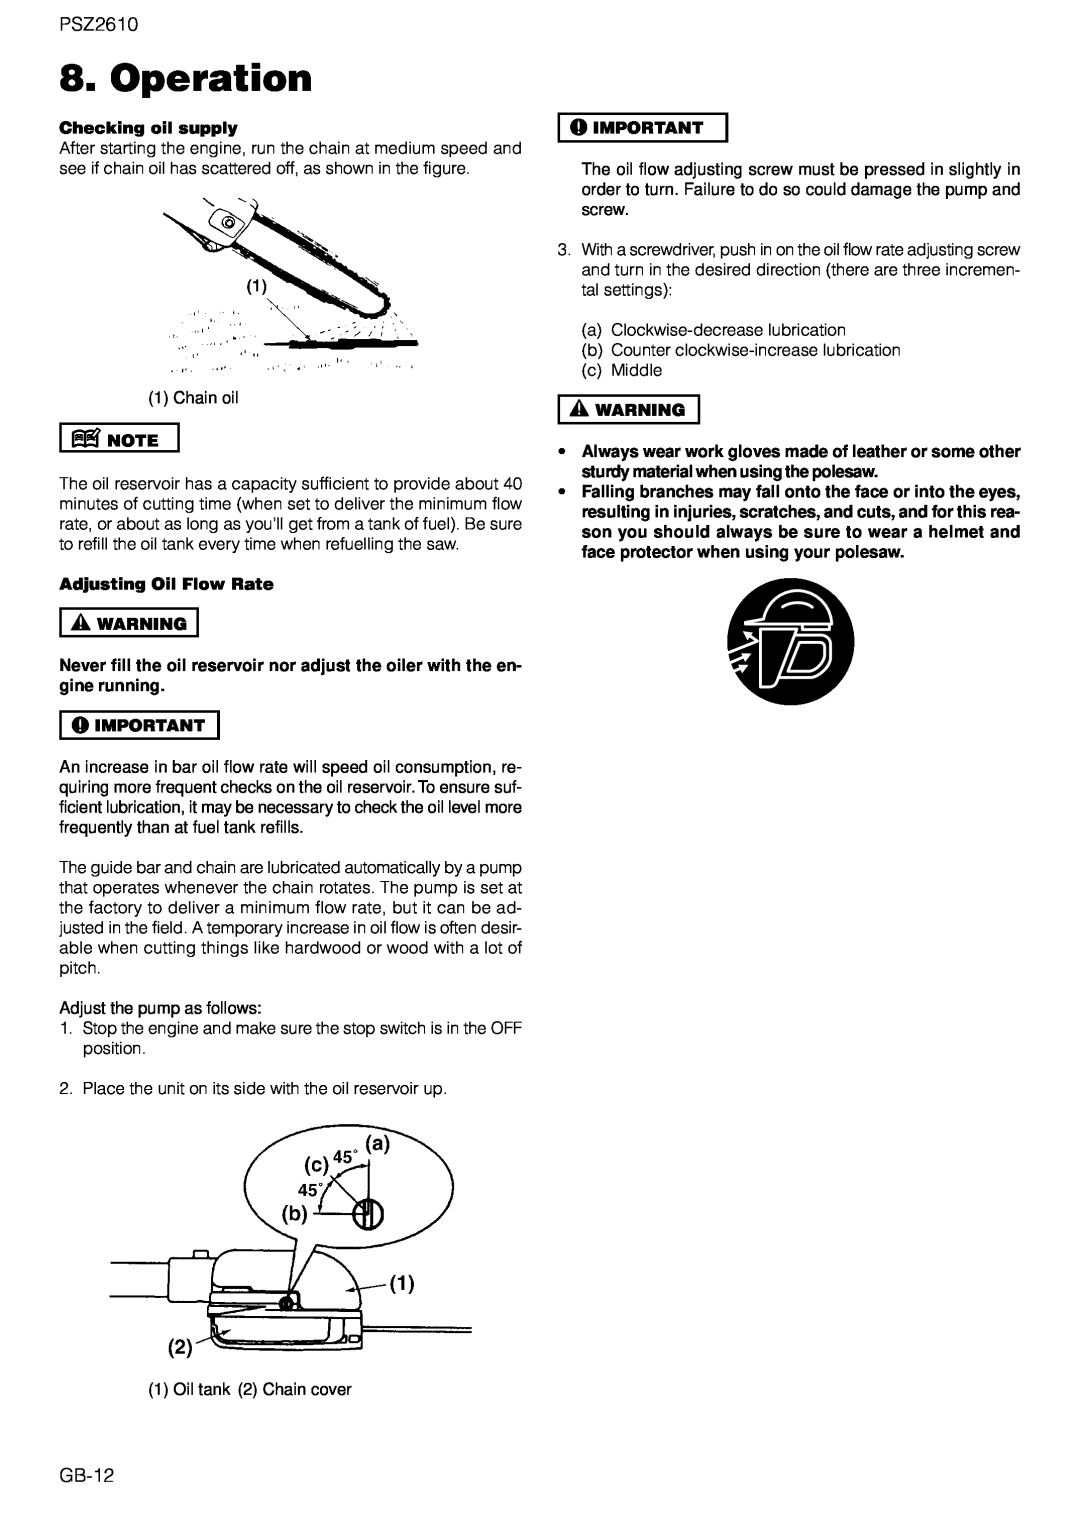 Zenoah PSZ2610 owner manual Operation, Checking oil supply, Adjusting Oil Flow Rate 